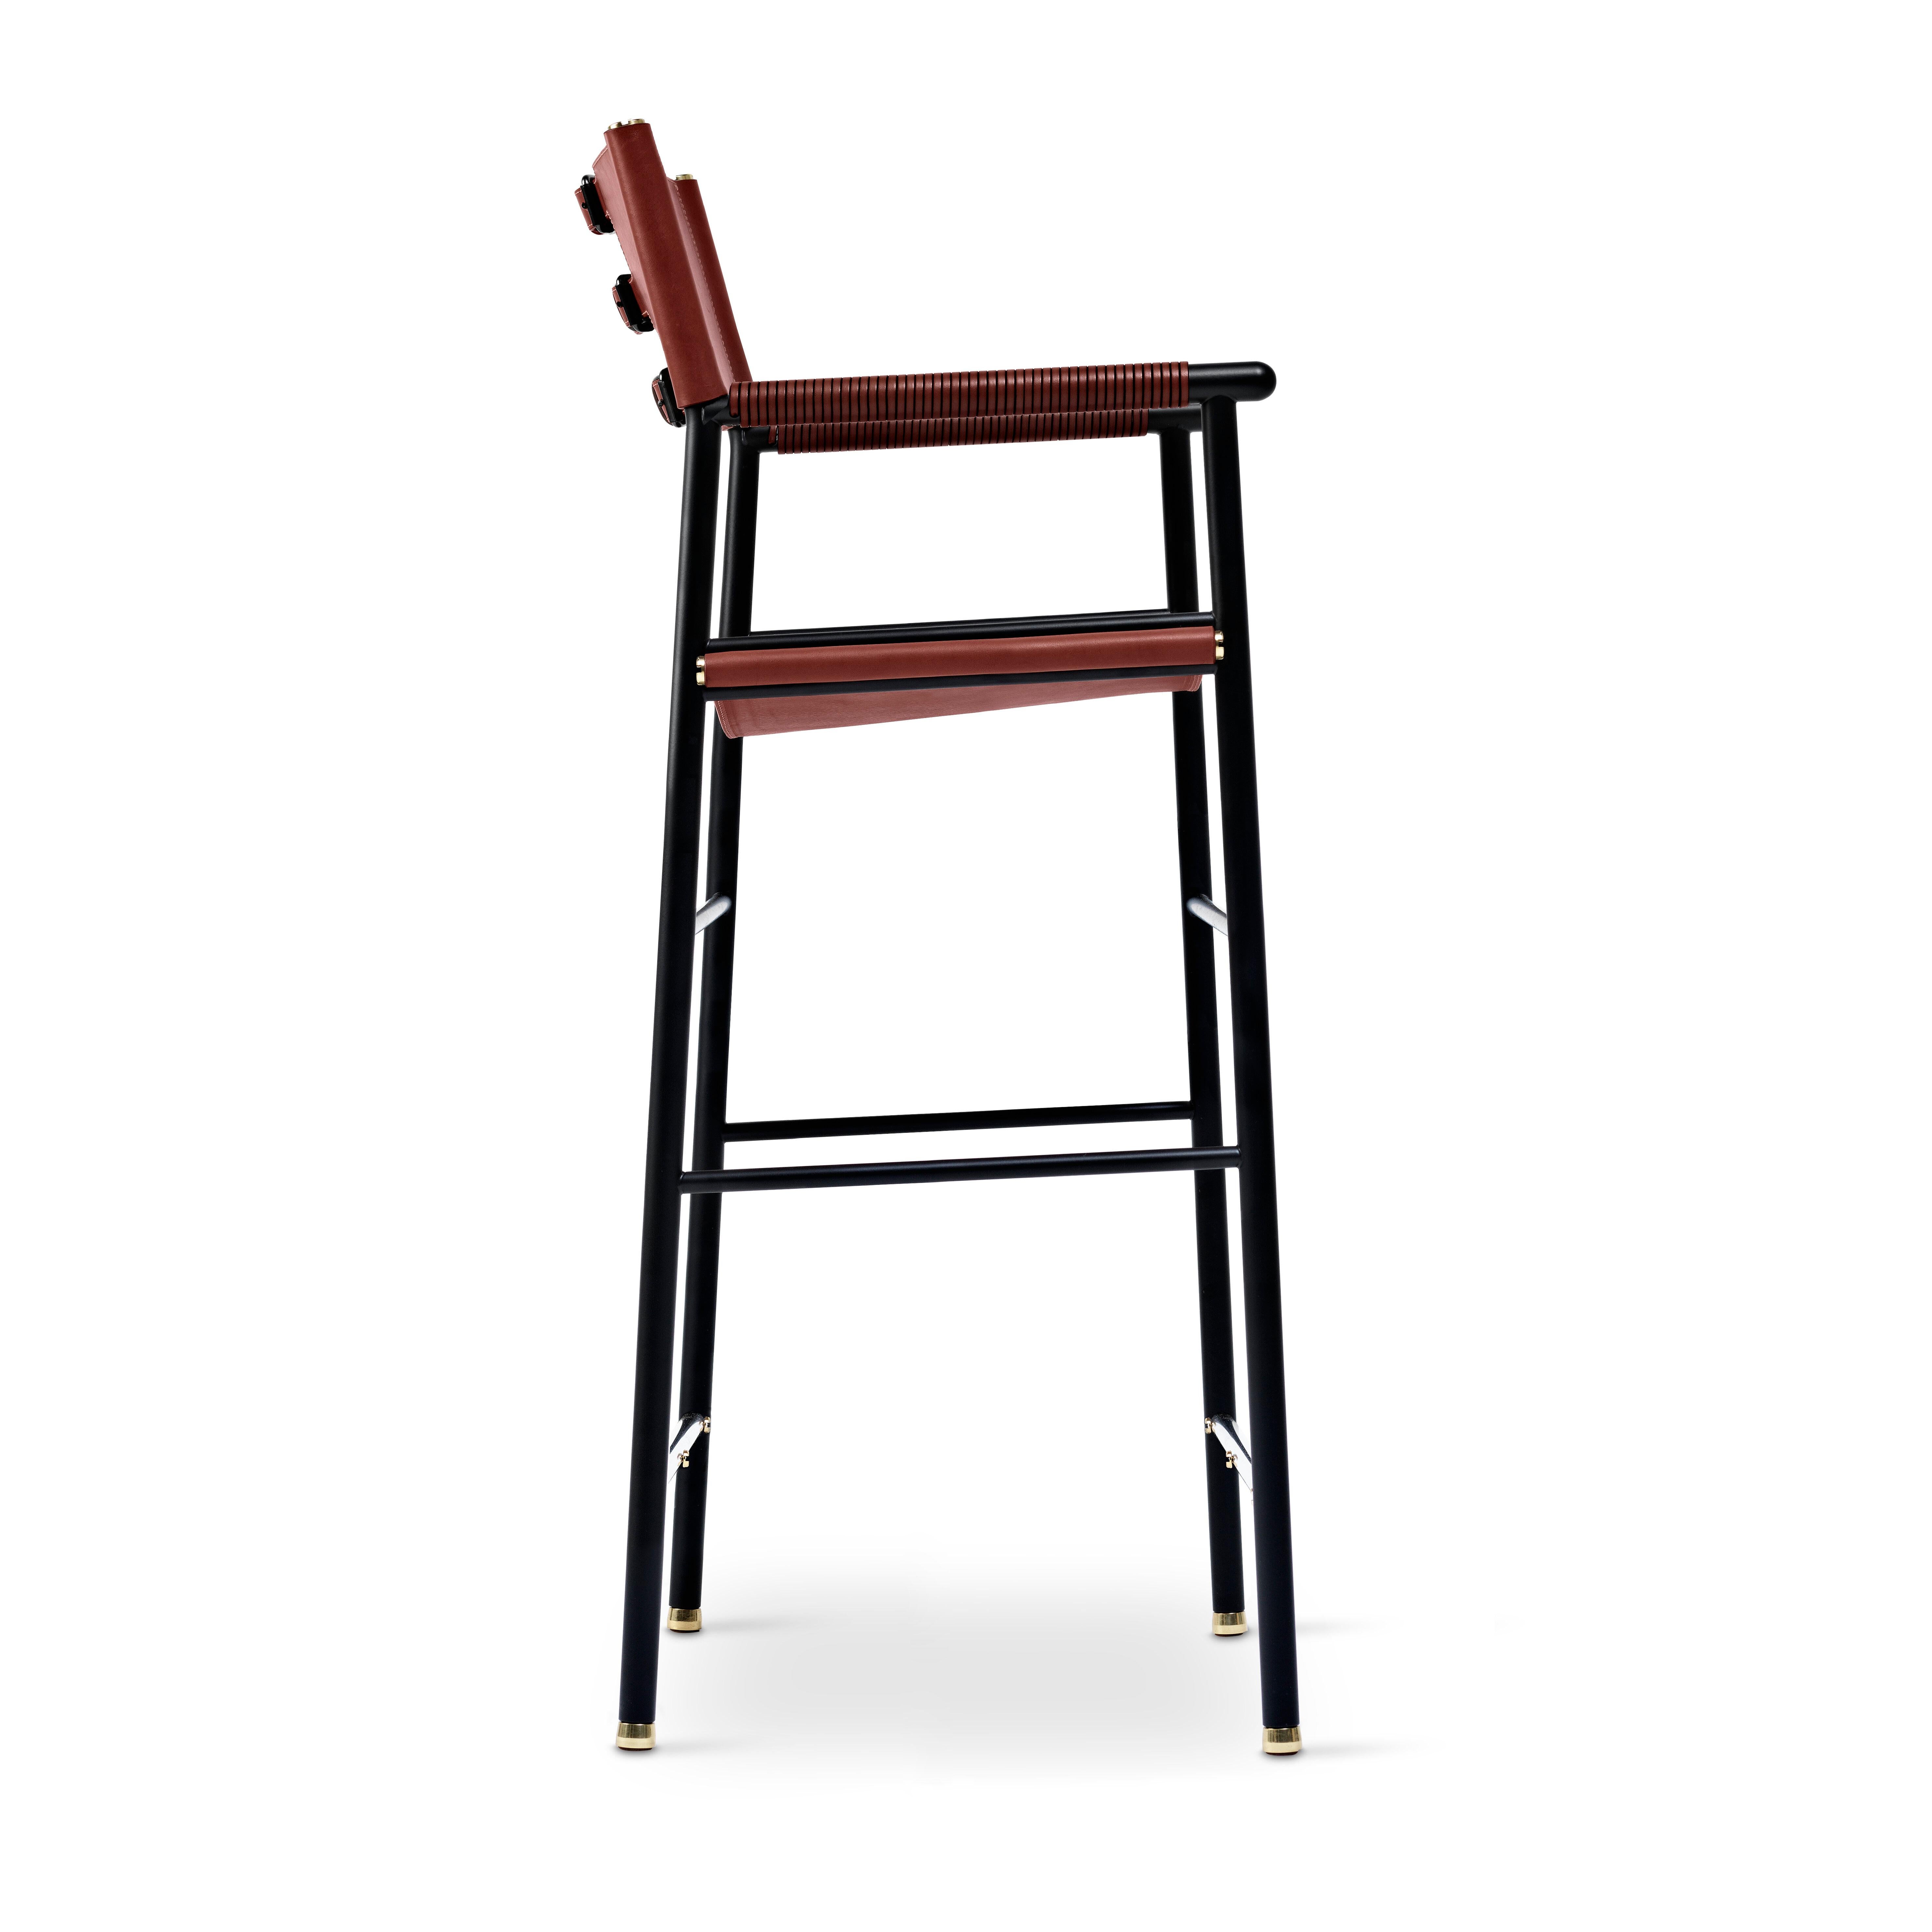 Spanish Classic Contemporary Bar Stool w. Backrest Cognac Leather & Black Rubber Metal For Sale